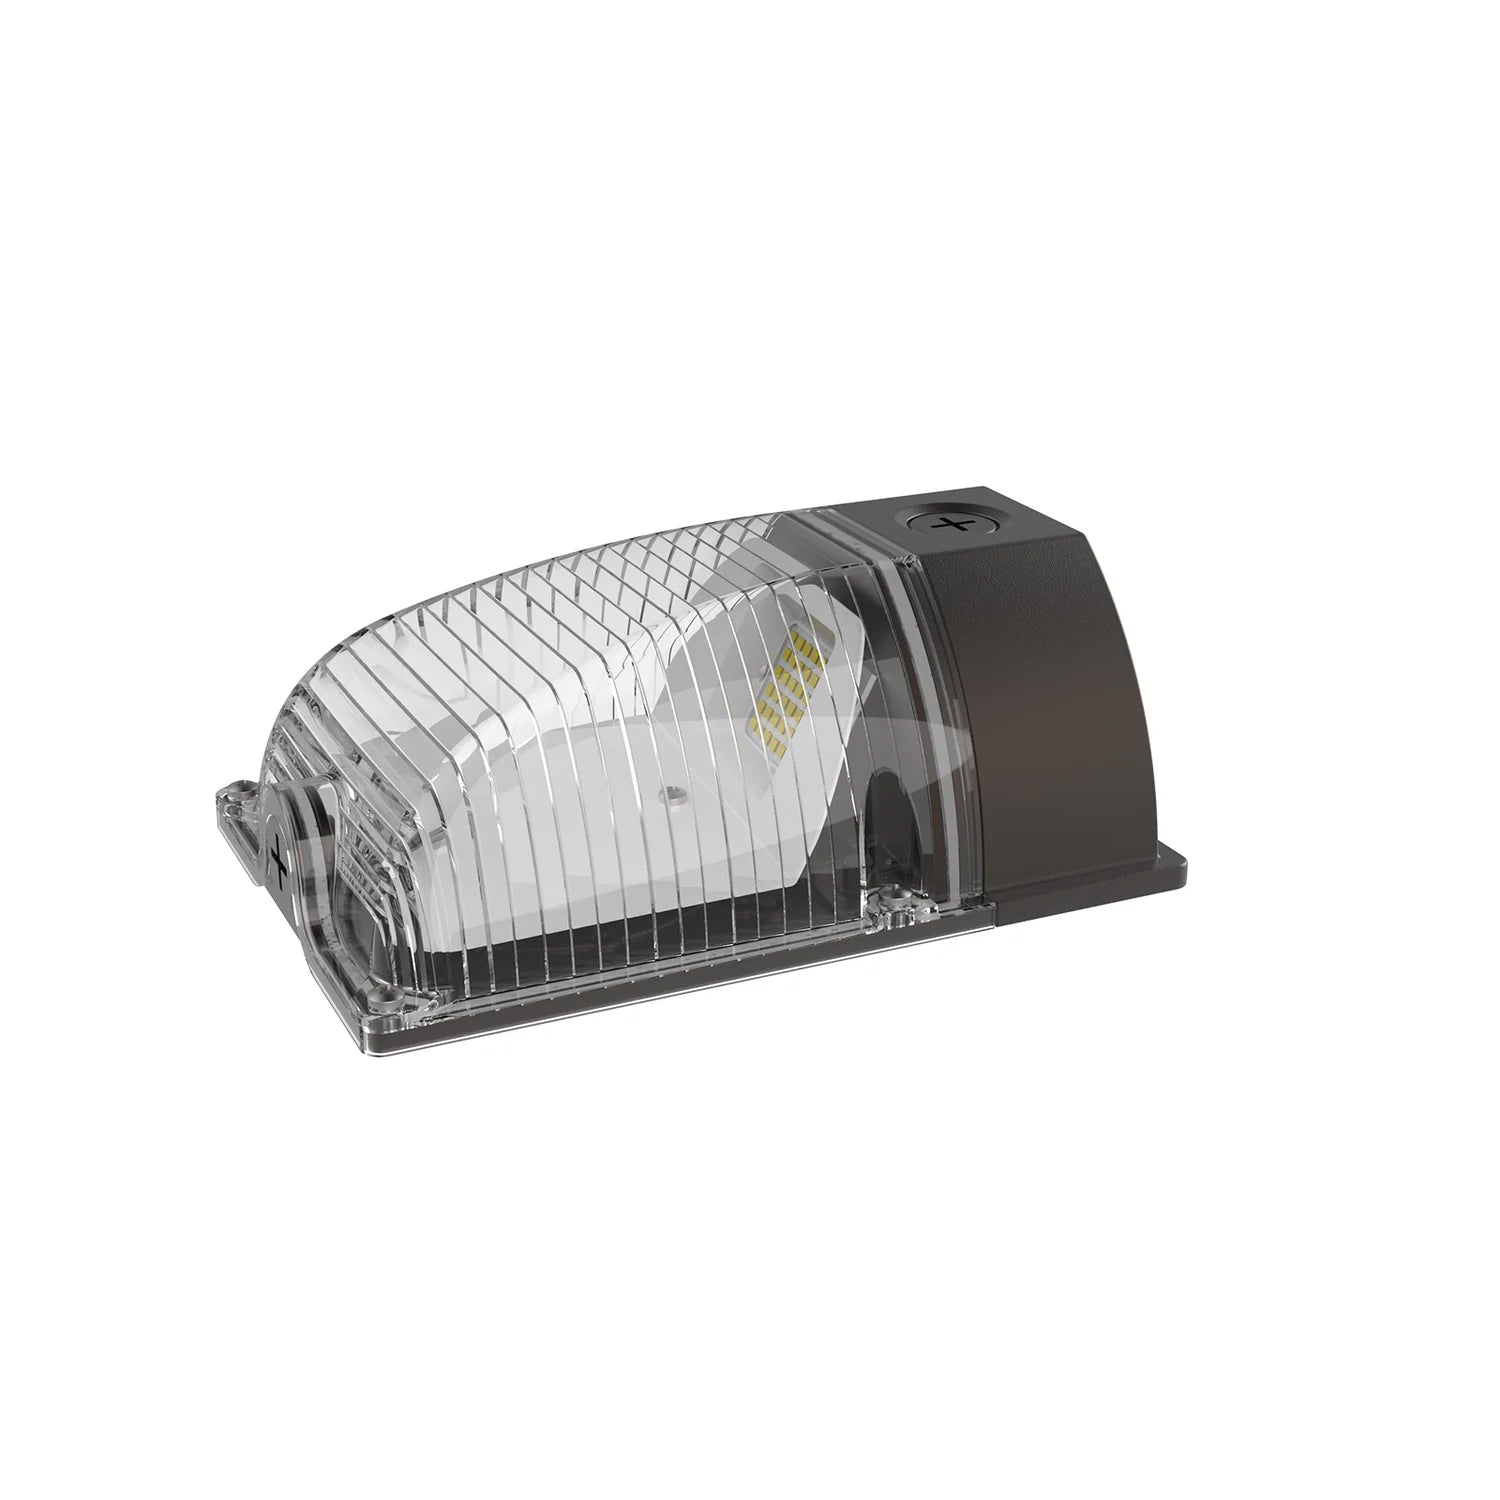 LED Wallpack 26-Watt 2600lm 5000K 100-277v PC Cover with Photocell